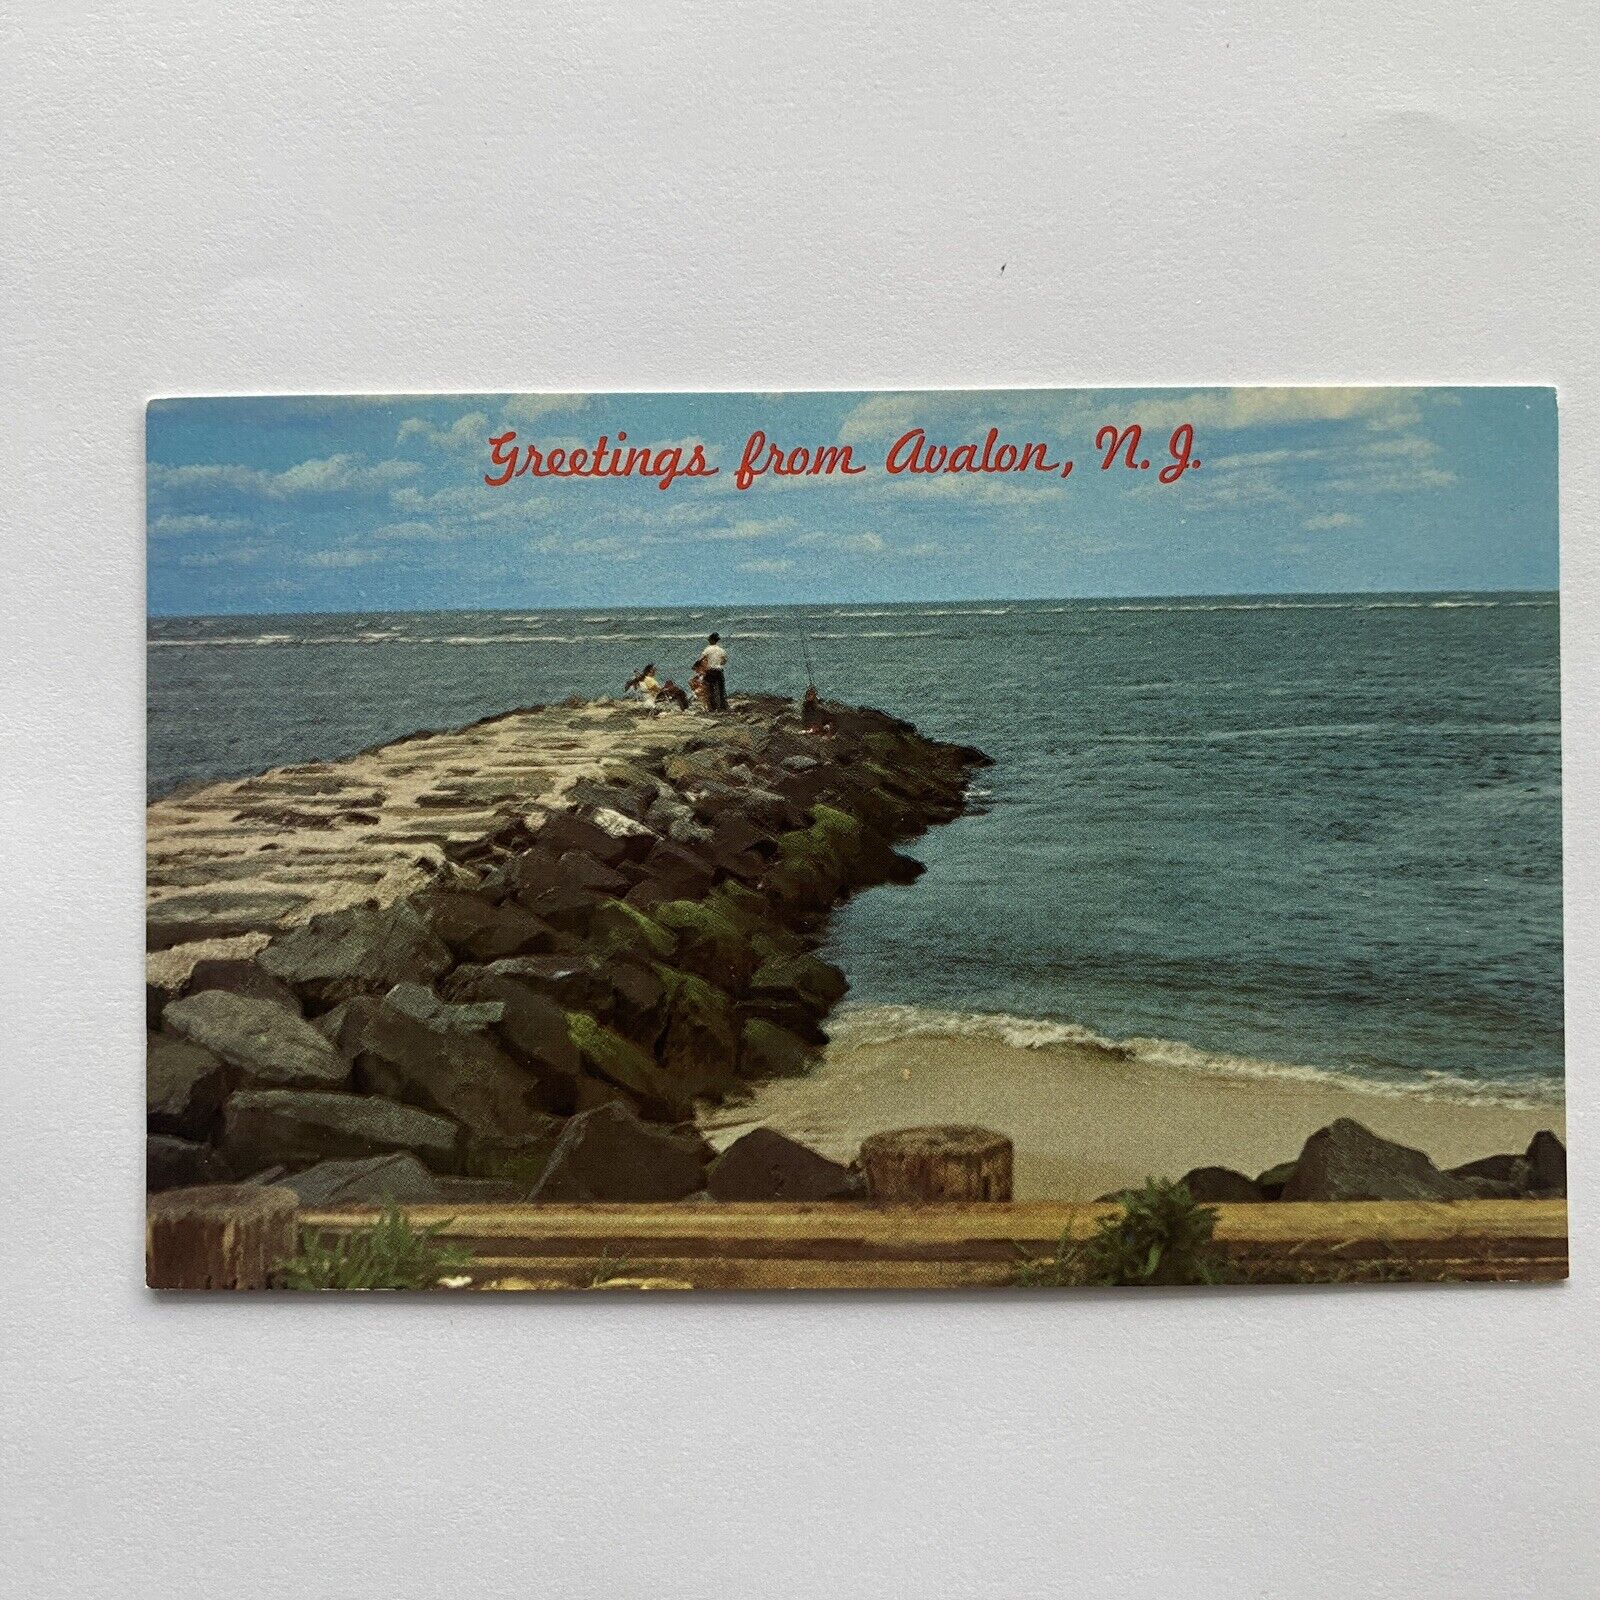 Greetings From Avalon New Jersey Stone Jetty With People Postcard VTG UNP